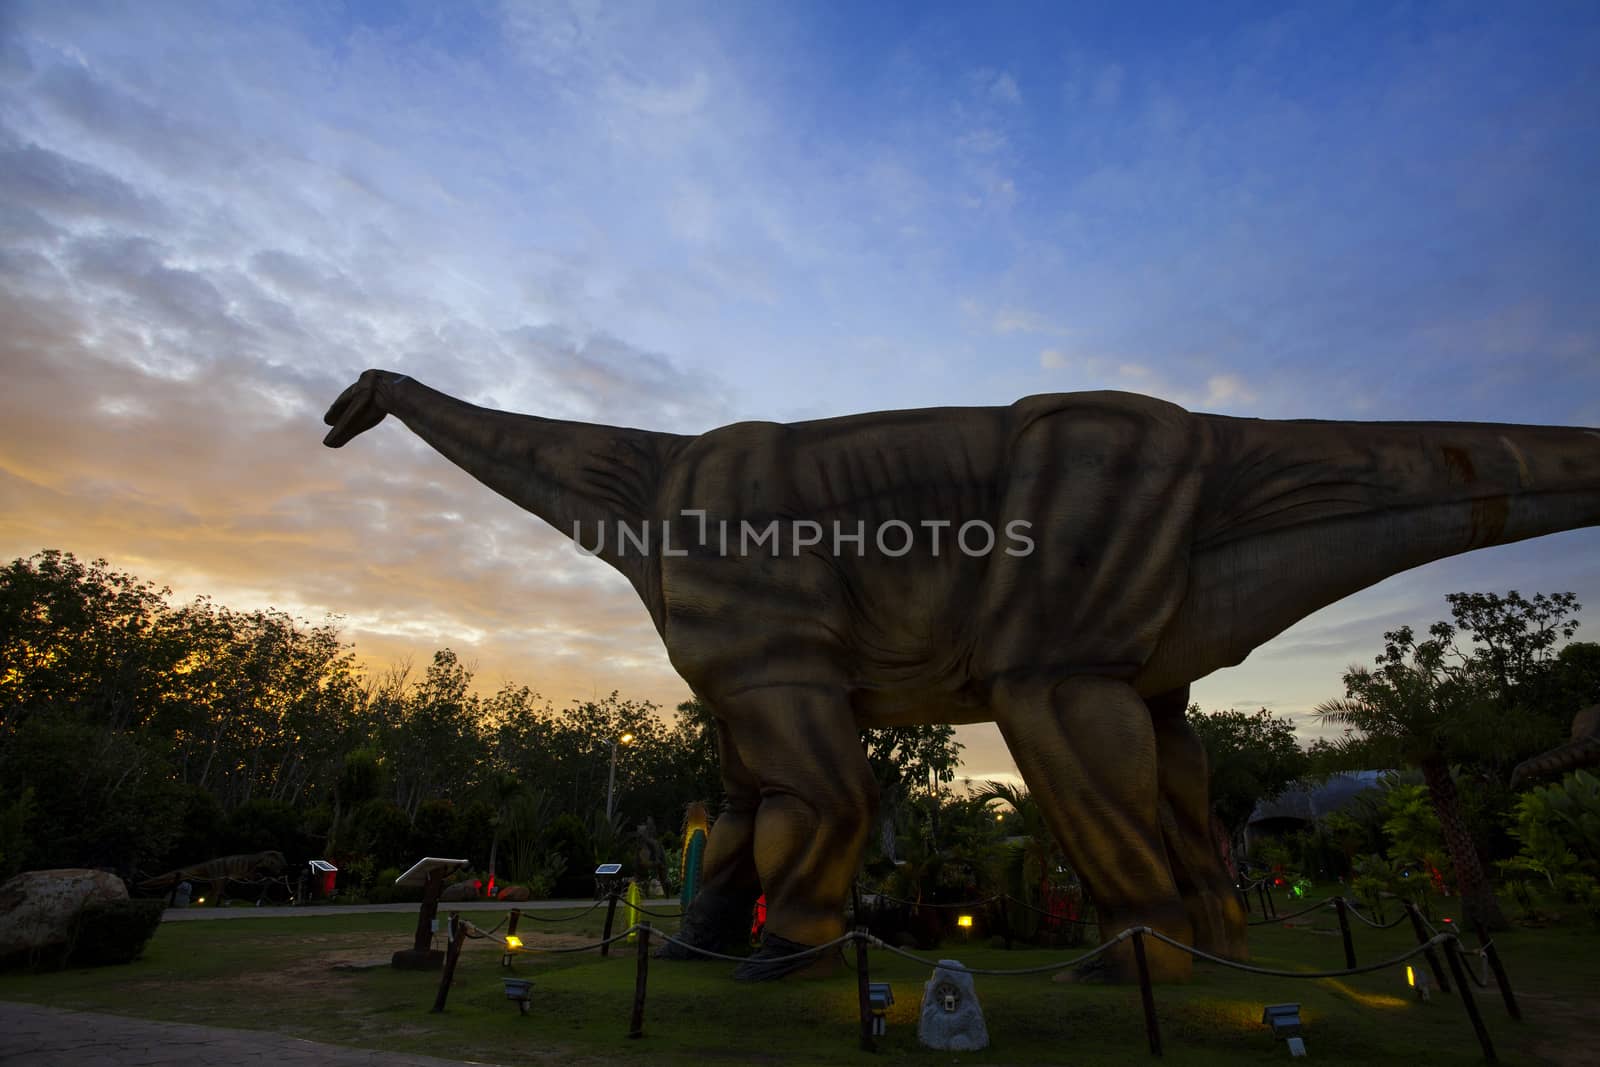 -20 September 2016 At the Dinosaur park Dannok Sadao District, Songkhla in Thailand opening hours 10.00 am. - 10.00 pm. In the evening have the blue sky and the light make it beautiful.